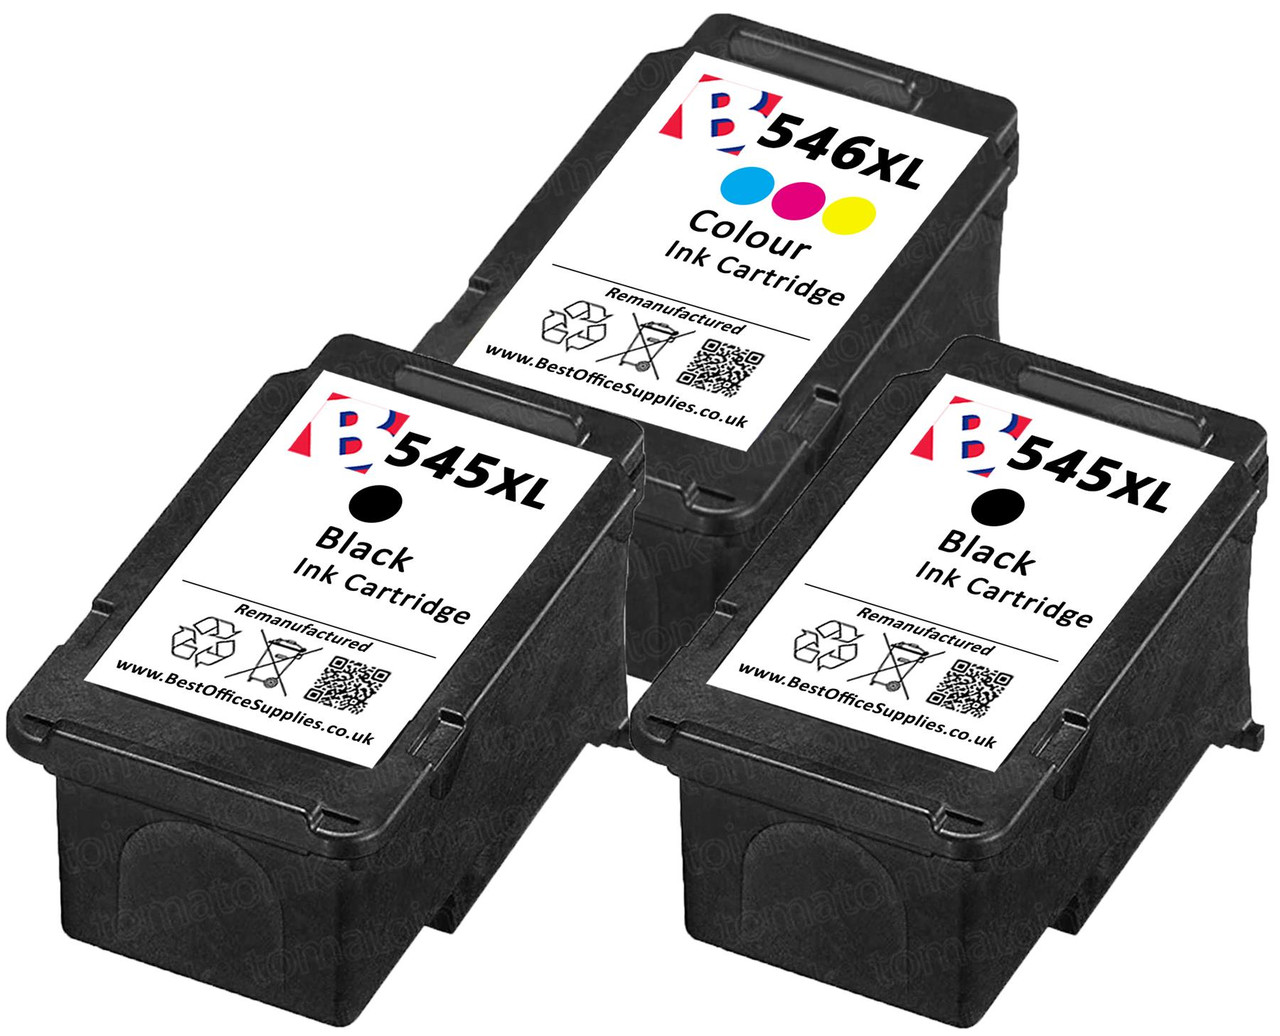 Canon PG-545 XL / CL-546 XL Remanufactured Ink Cartridges 3-Pack- High  Capacity Black & Tri-Colour 3-Pack Ink Cartridges - Compatible For (PG-545XL,  PG545XL, 8286B001, Canon 545XL, CL-546XL, CL546XL, 8288B004) - Best Office